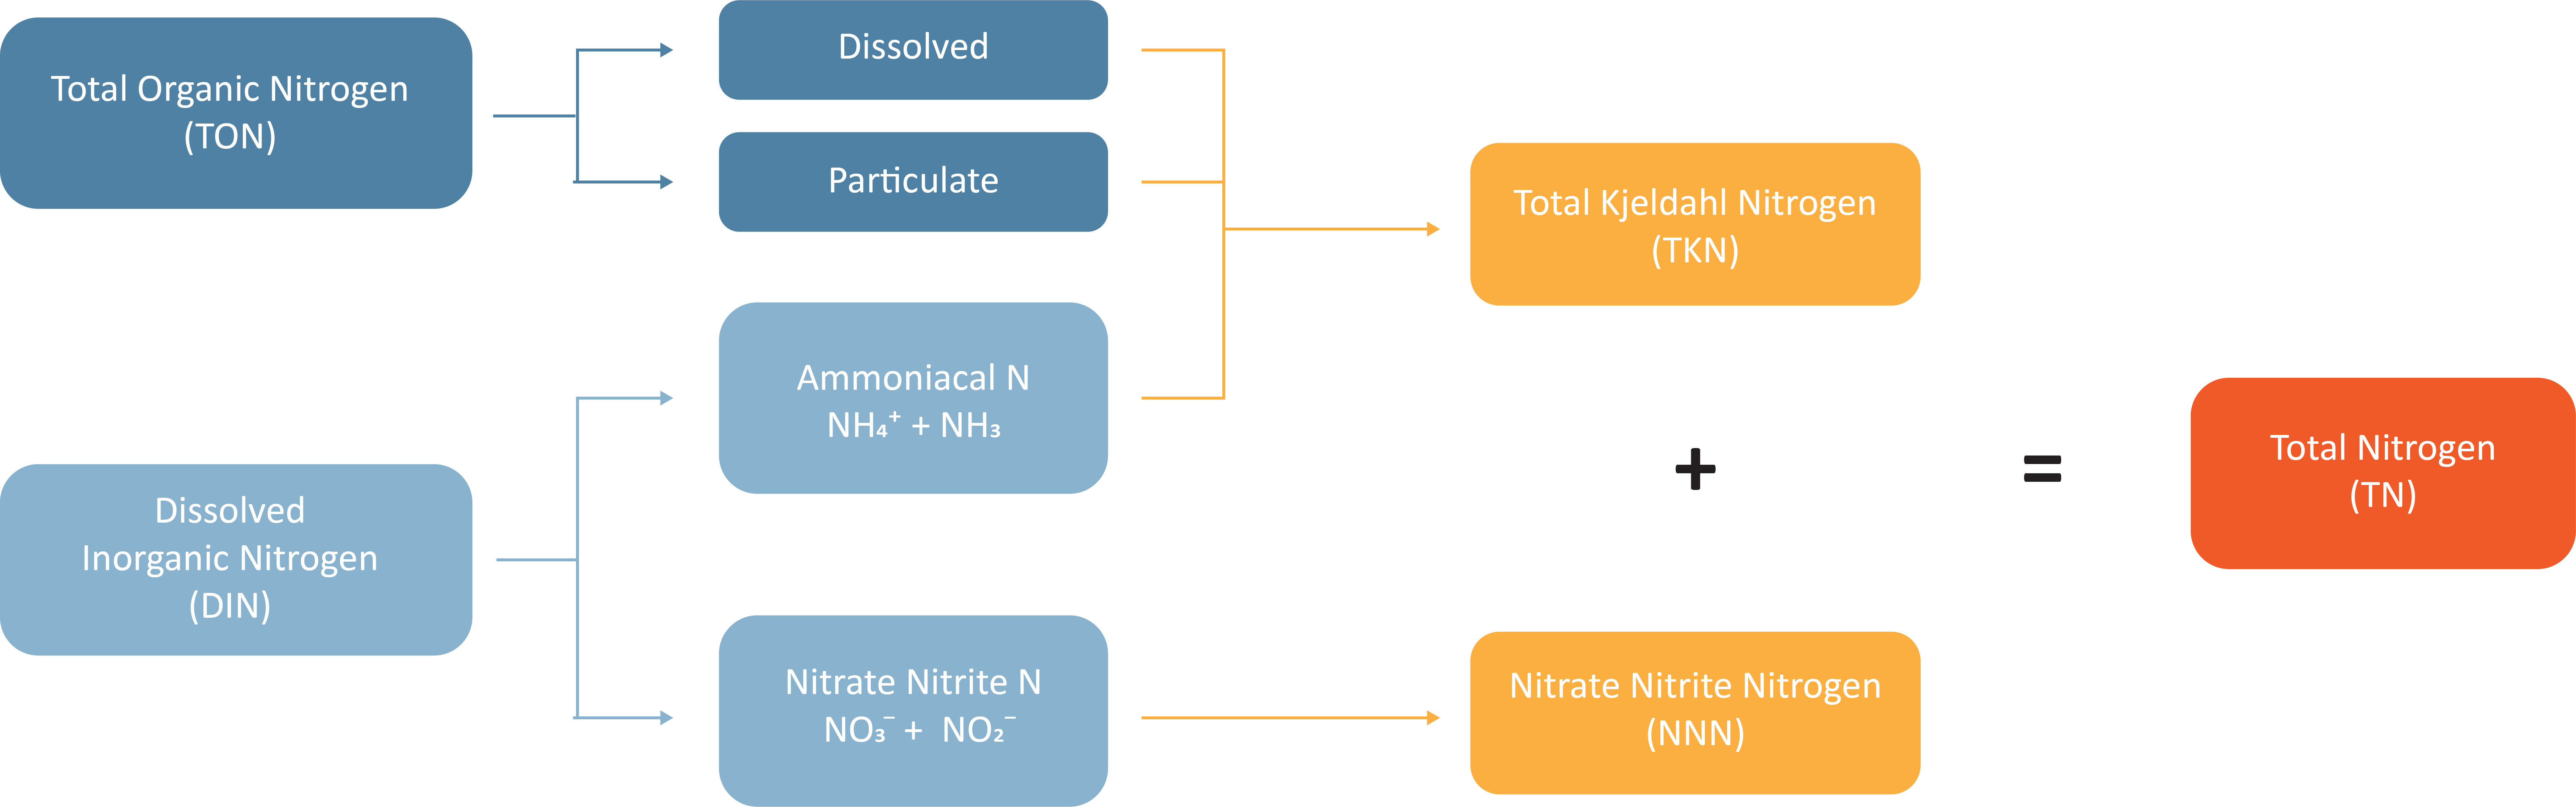 A very complex diagram showing the movement of nitrogen in the landscape and atmosphere.